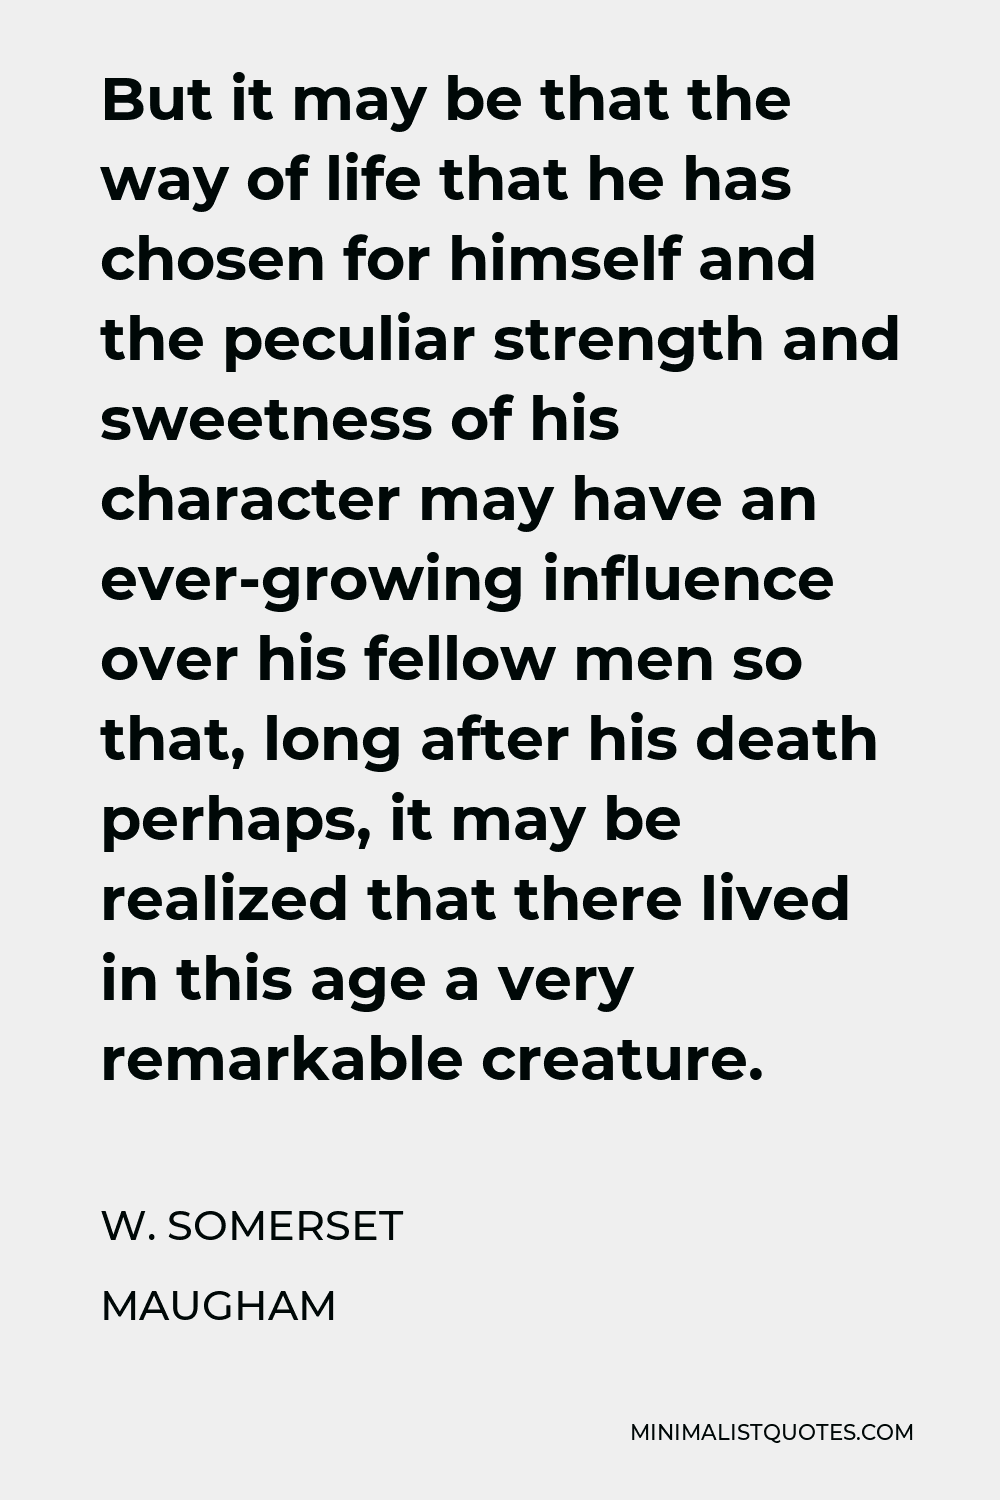 W. Somerset Maugham Quote - But it may be that the way of life that he has chosen for himself and the peculiar strength and sweetness of his character may have an ever-growing influence over his fellow men so that, long after his death perhaps, it may be realized that there lived in this age a very remarkable creature.